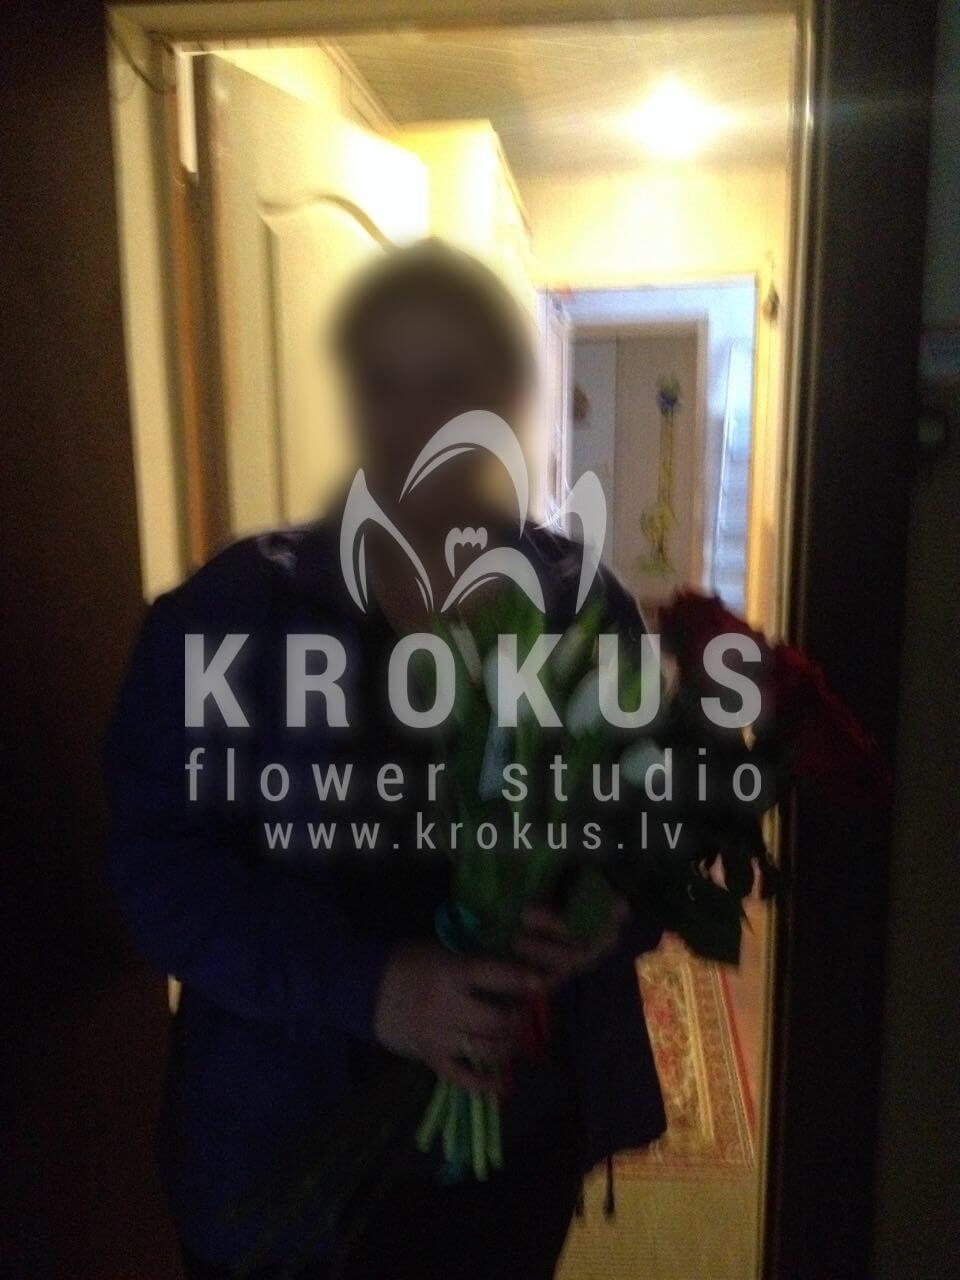 Deliver flowers to Latvia (tulipsred roses)